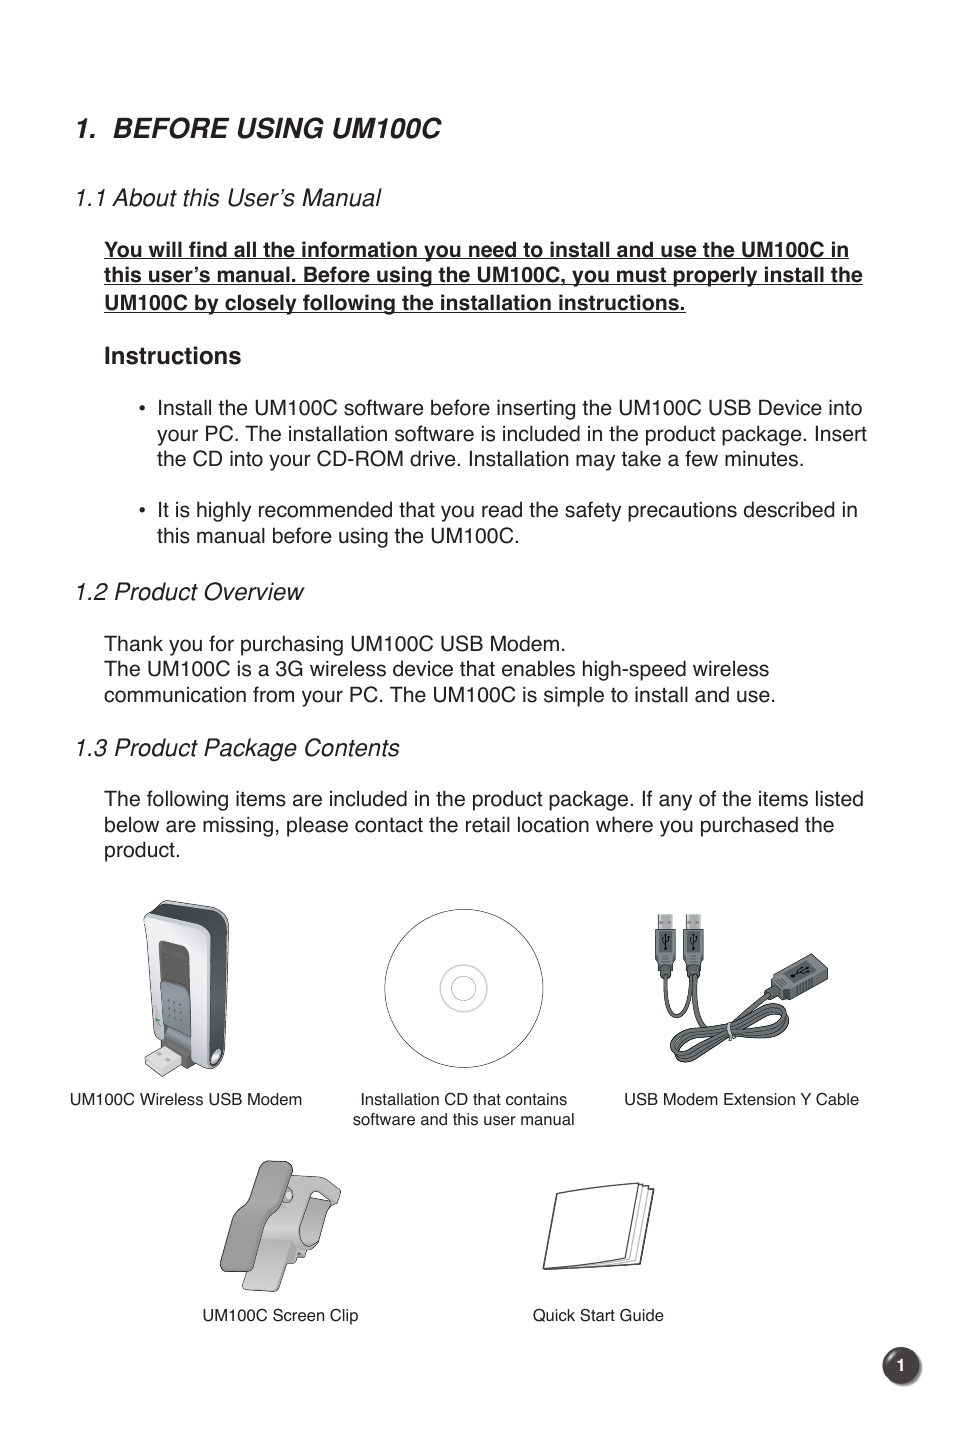 Before using um100c, 1 about this user’s manual, Instructions | 2 product overview, 3 product package contents | UTStarcom UM100C User Manual | Page 3 / 38